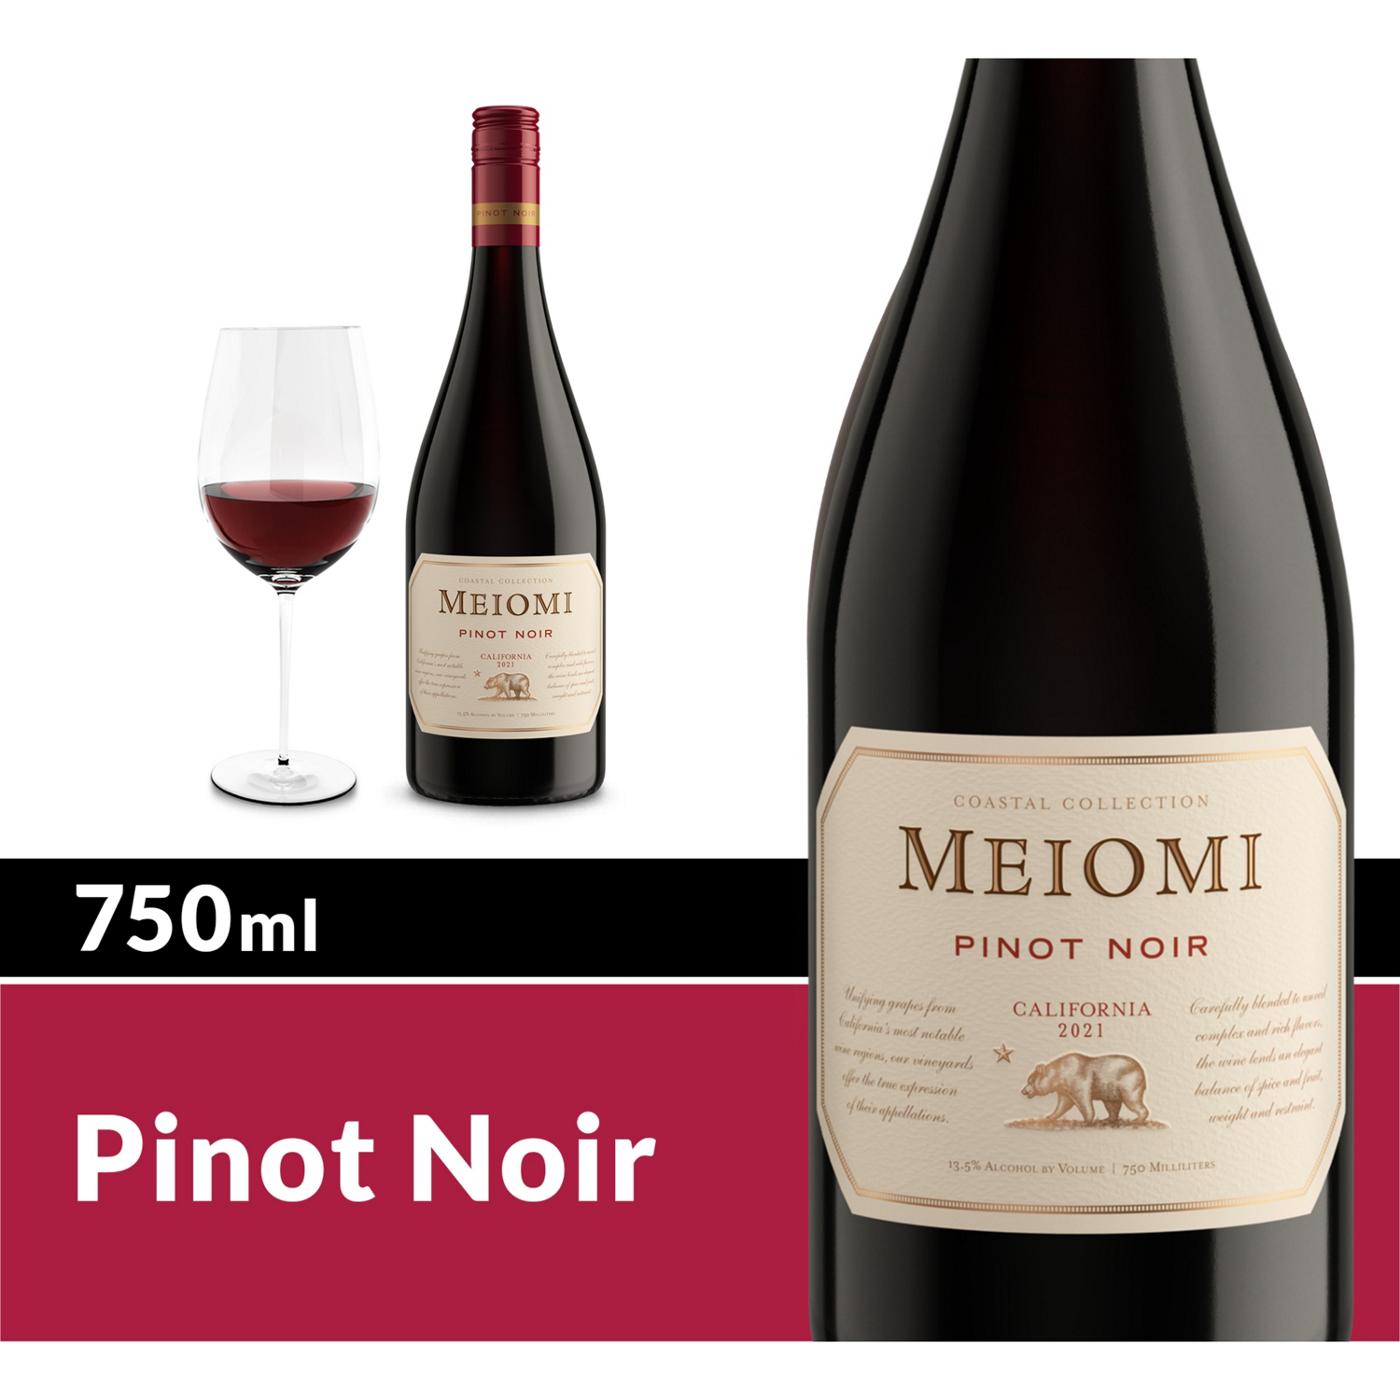 Meiomi Pinot Noir Coastal Collection Red Wine 750 mL Bottle; image 6 of 10